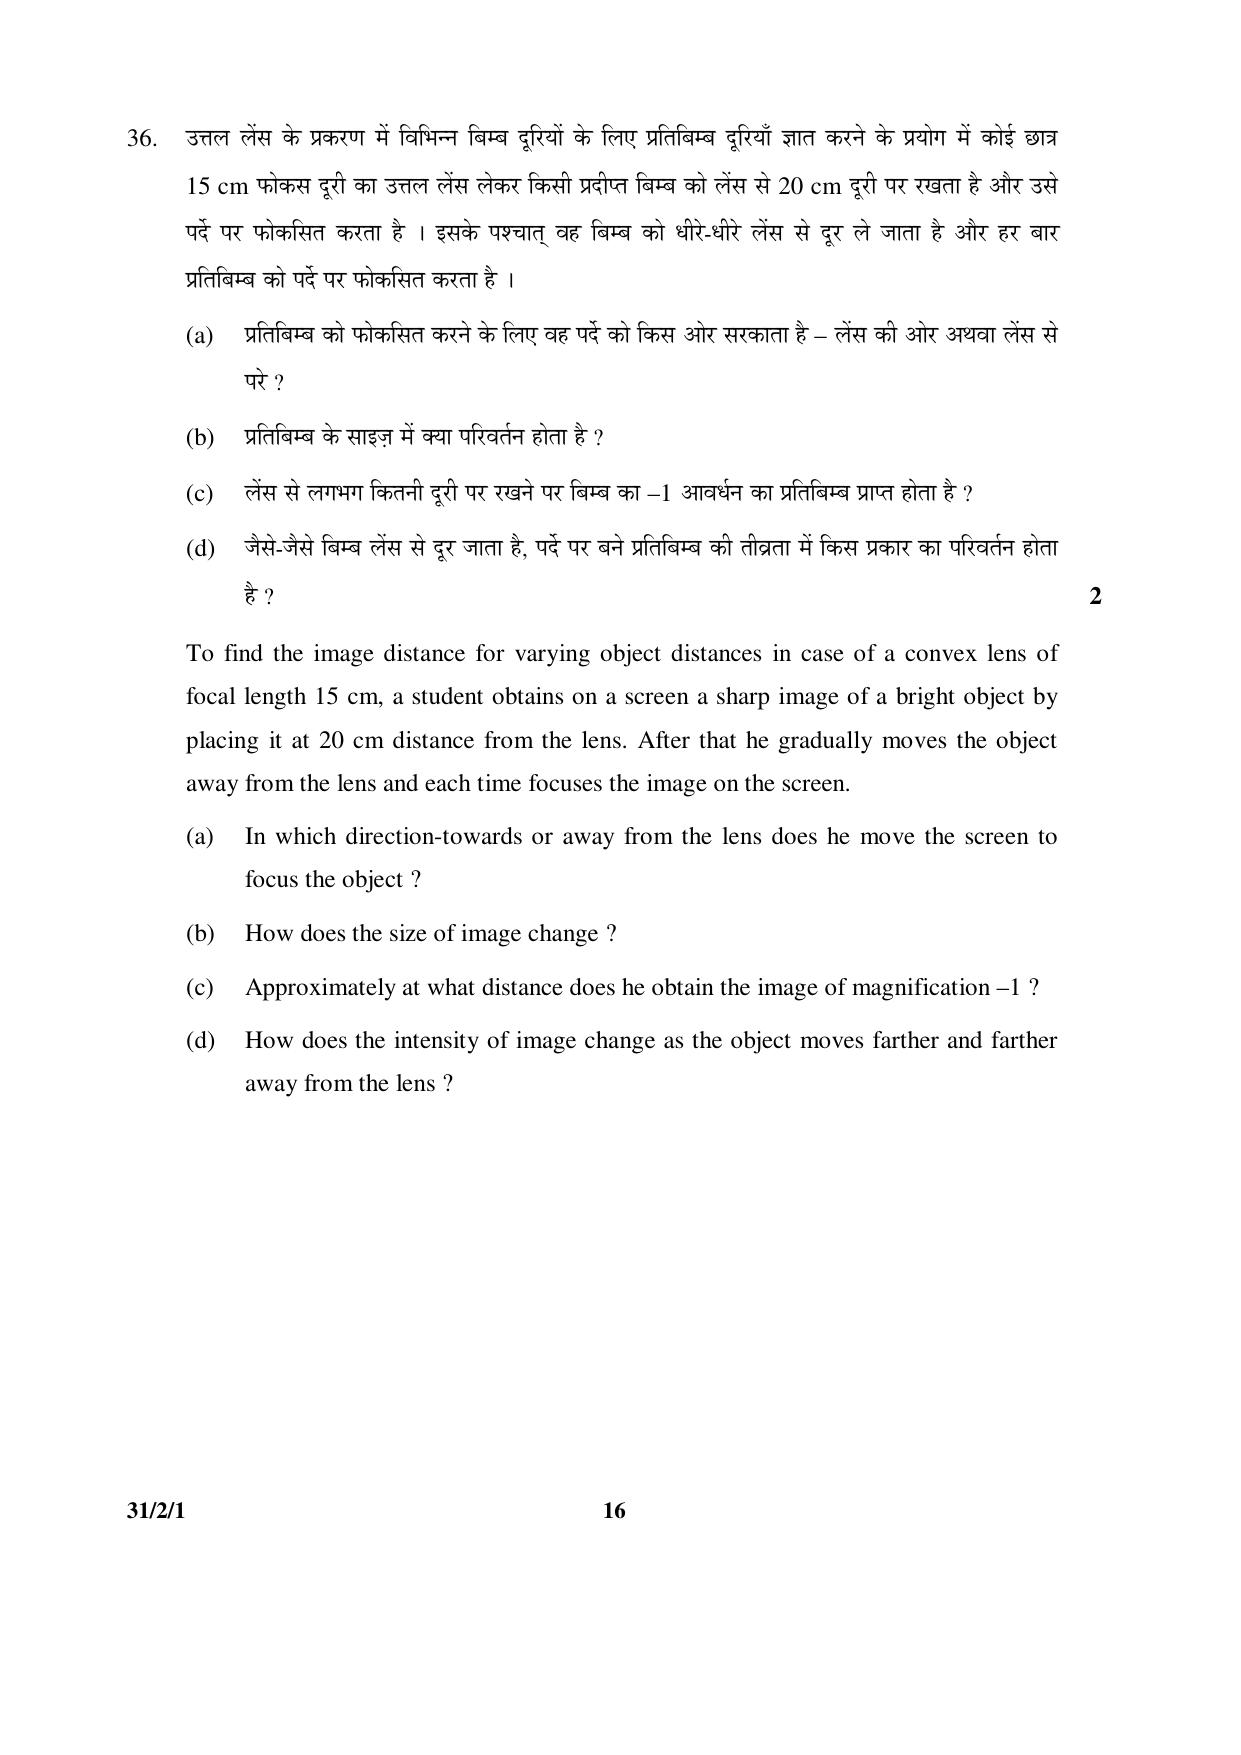 CBSE Class 10 31-2-1 _Science 2016 Question Paper - Page 16